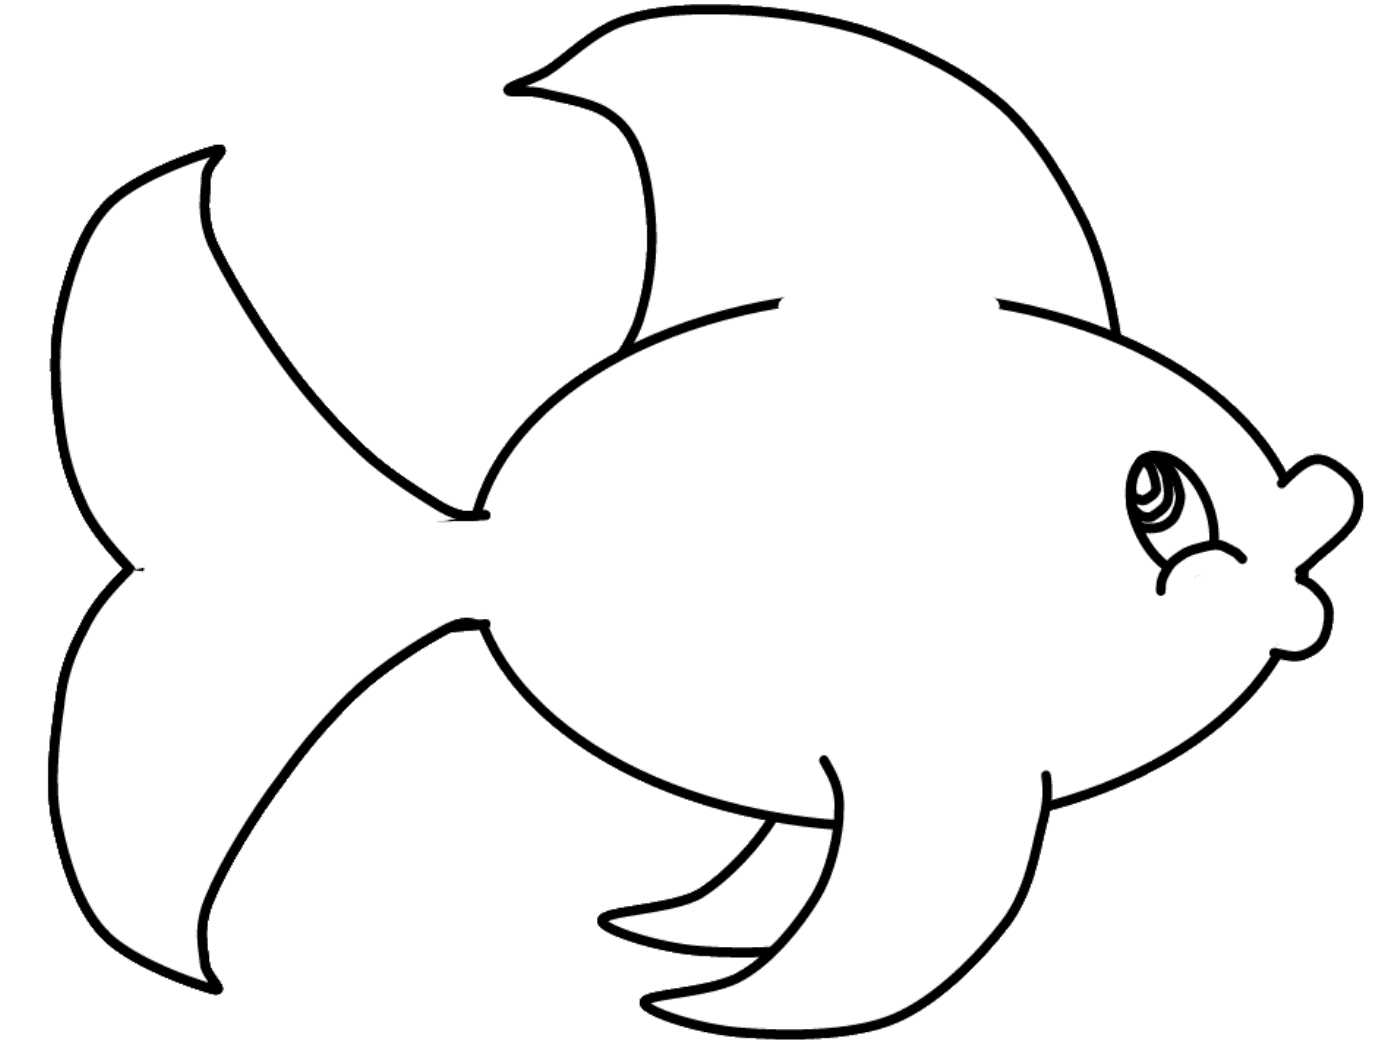 free-simple-fish-drawing-download-free-simple-fish-drawing-png-images